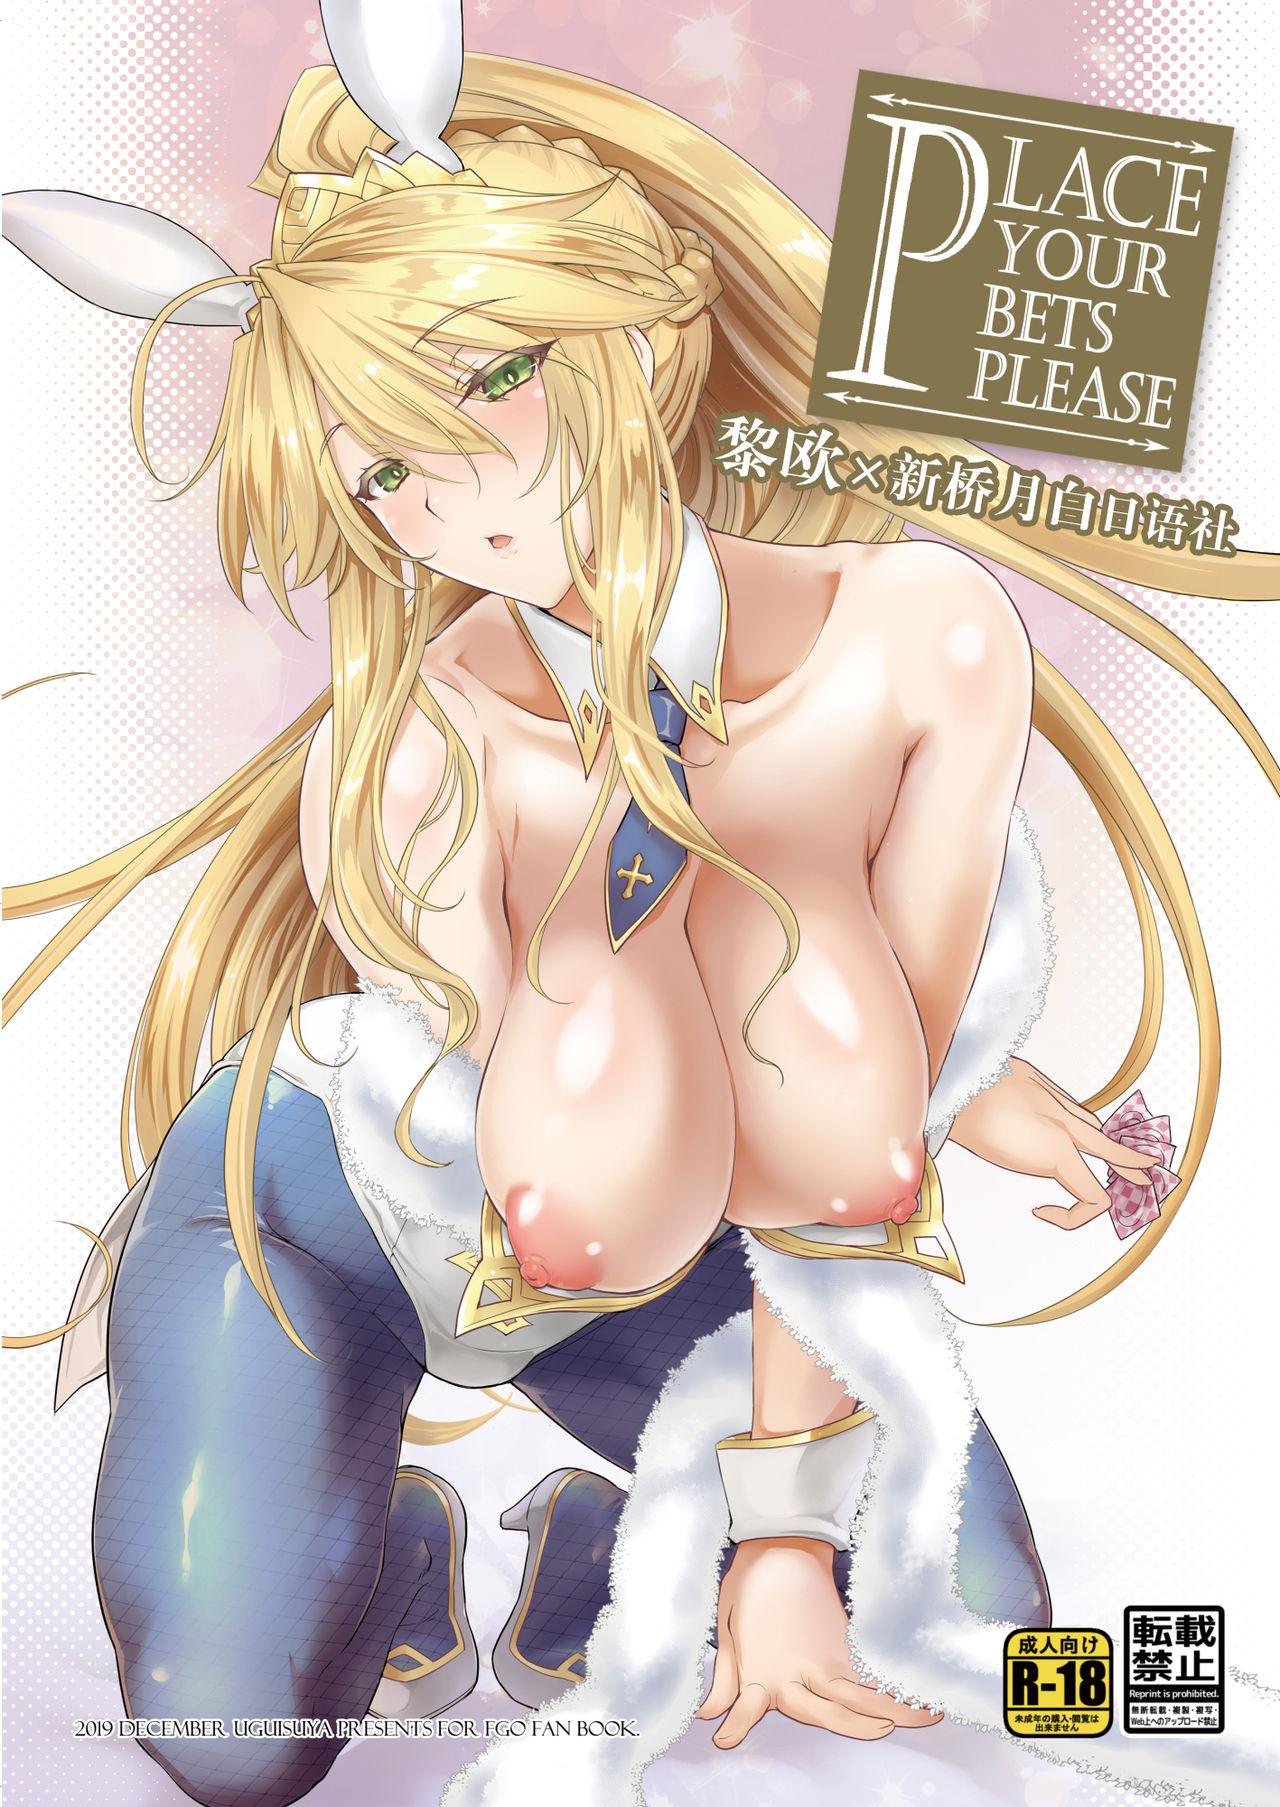 Fucks Place your bets please - Fate grand order Free Real Porn - Page 1